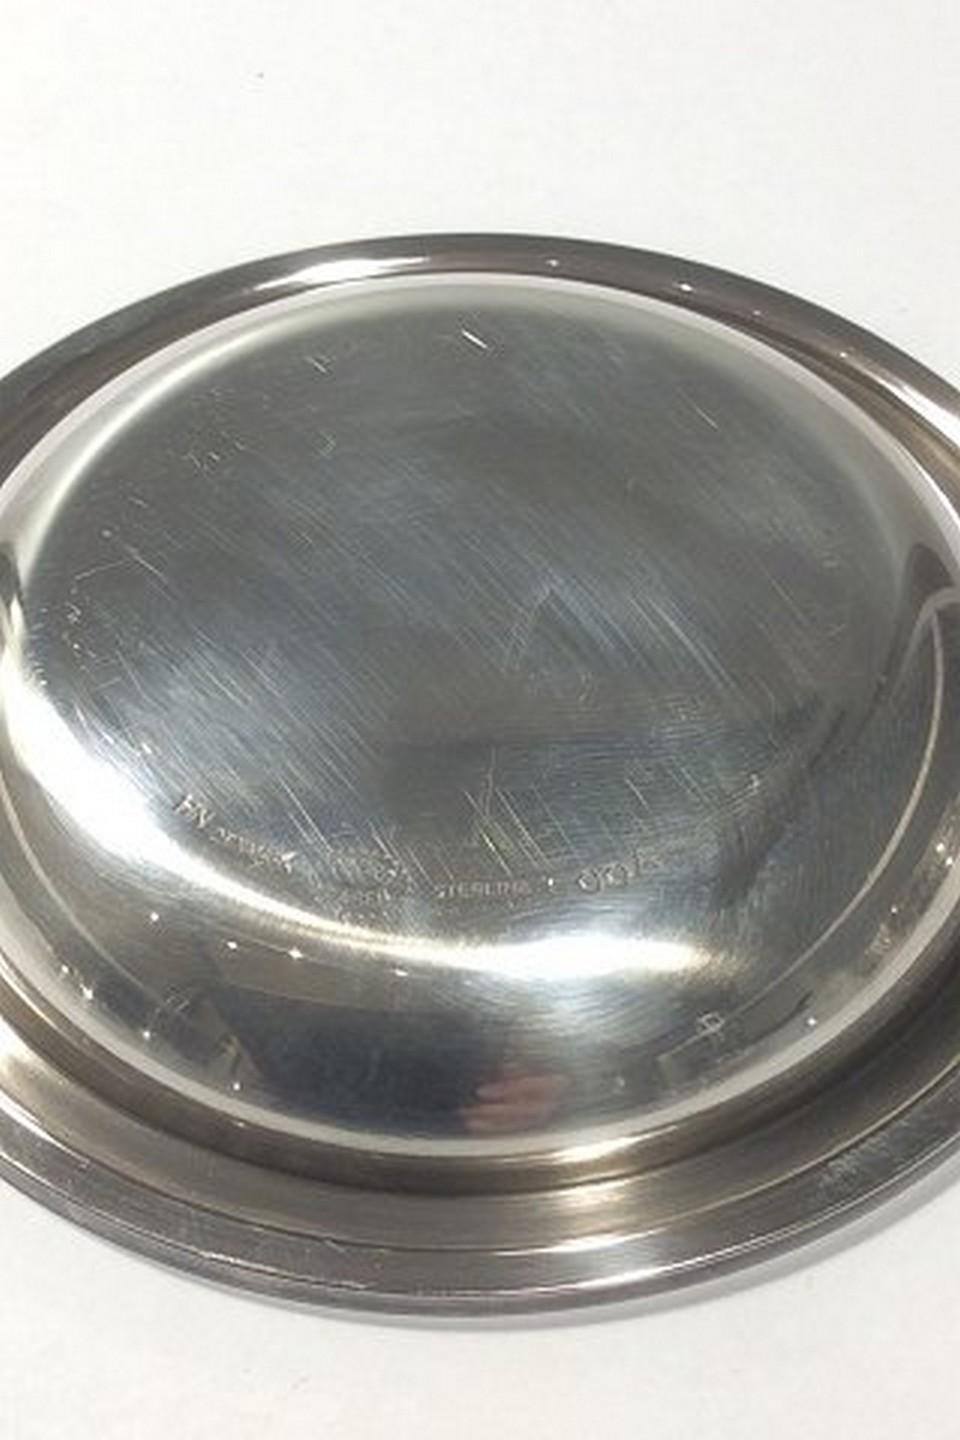 Georg Jensen sterling silver pyramid glass coaster or nut dish 600 A.

Measures: 9cm / 3.54